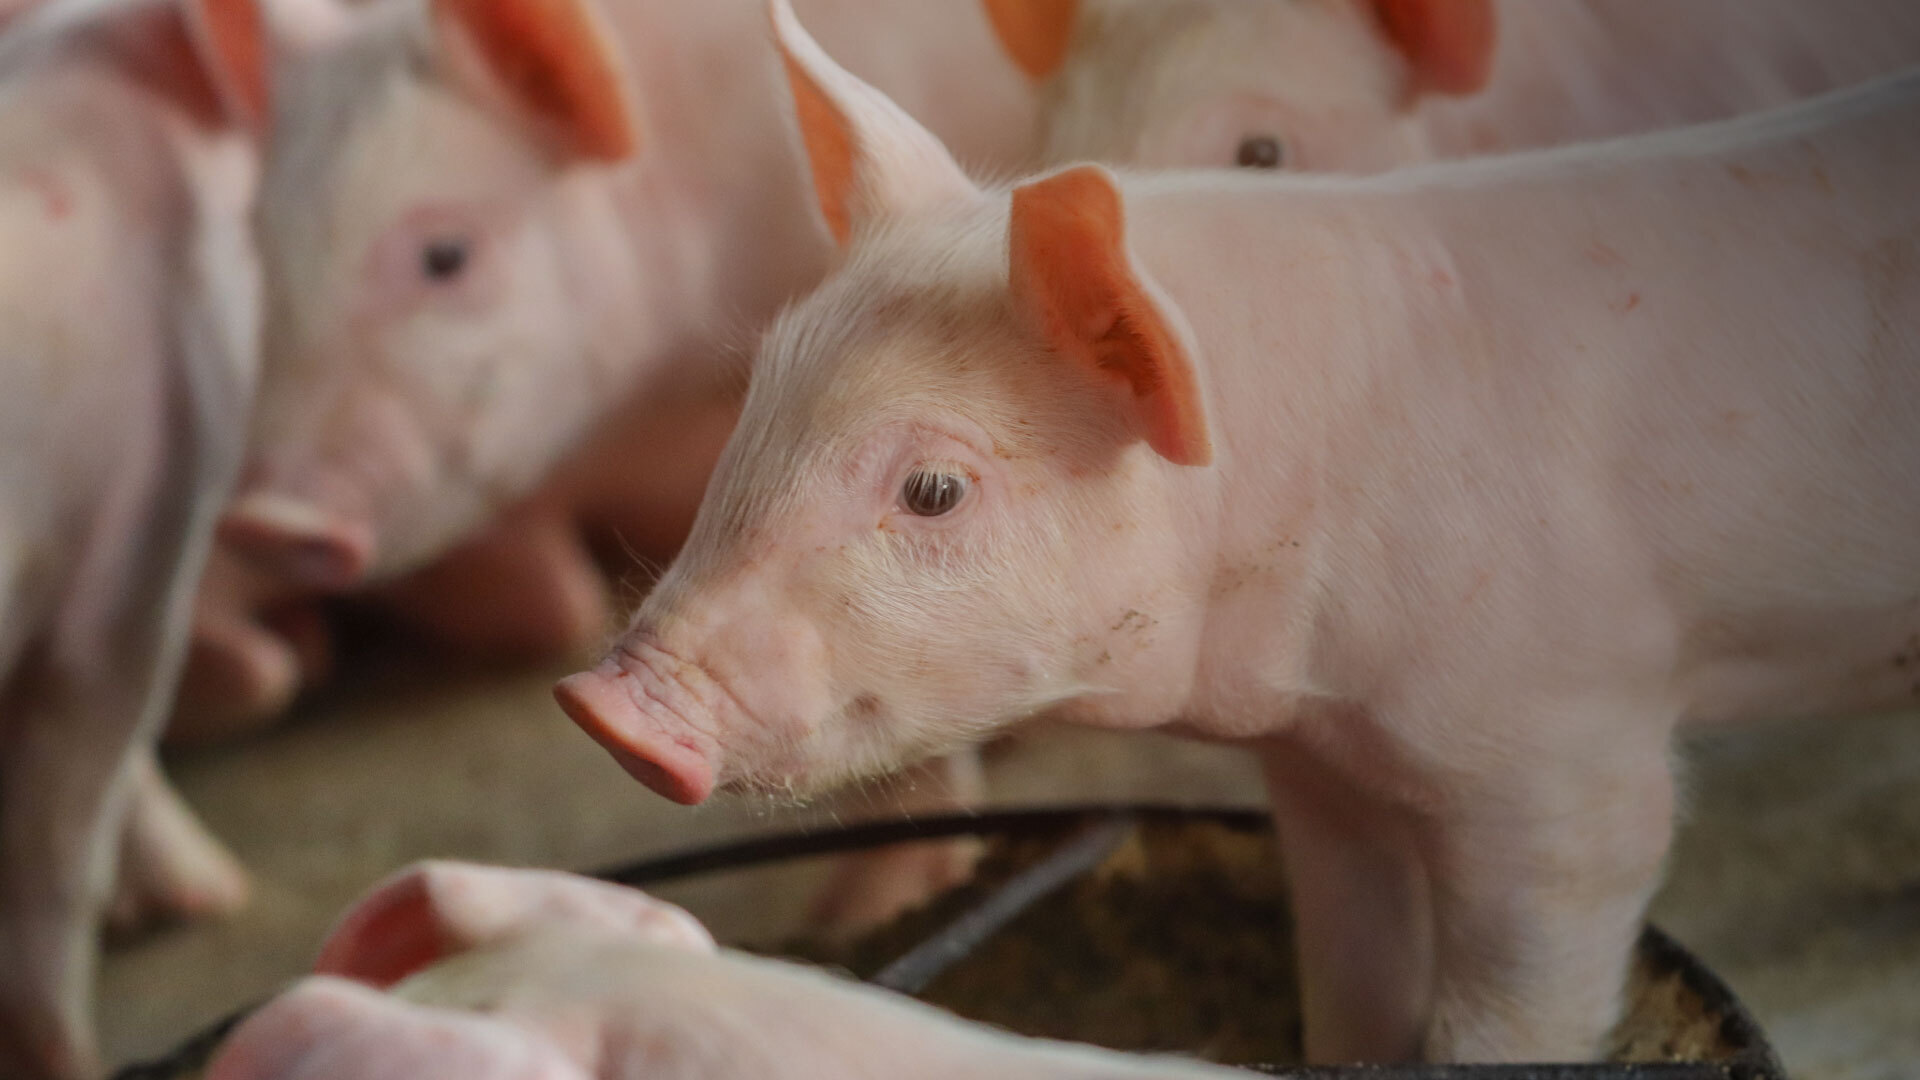 Neonatal porcine coccidiosis is a highly prevalent disease of great importance in intensive pig farming, due to its negative effects on the growth and development of piglets.